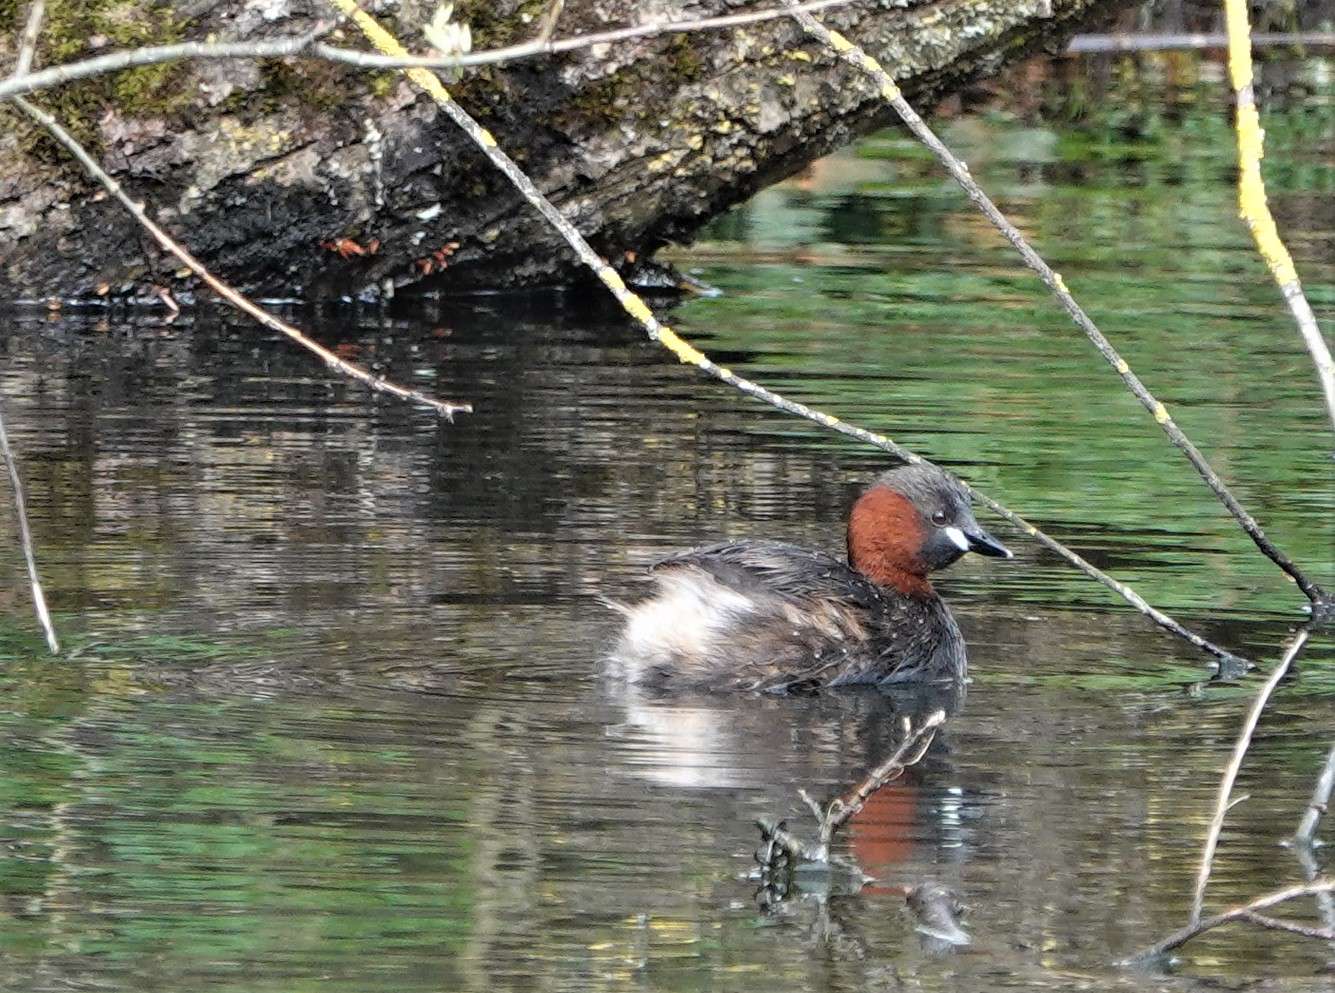 Little Grebe by Paul Howrihane at Wrafton Pond